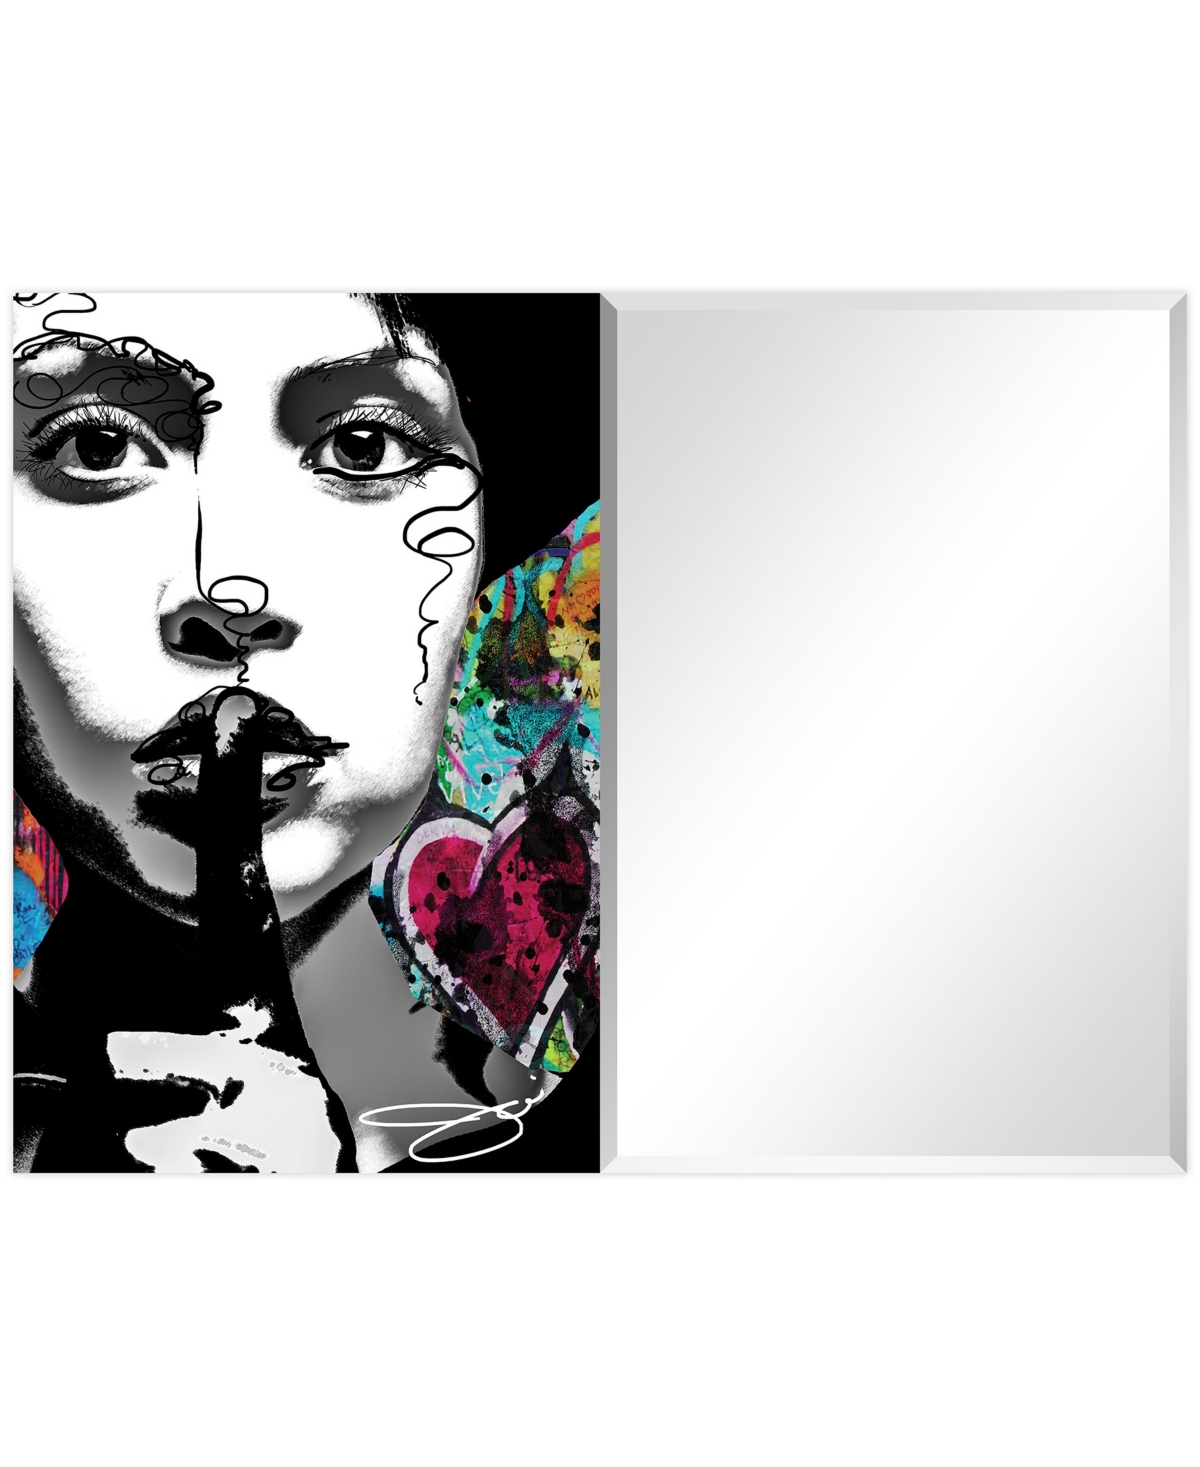 Empire Art Direct "secrets" Rectangular Beveled Mirror On Free Floating Printed Tempered Art Glass, 36" X 48" X 0.4" In Multi-color